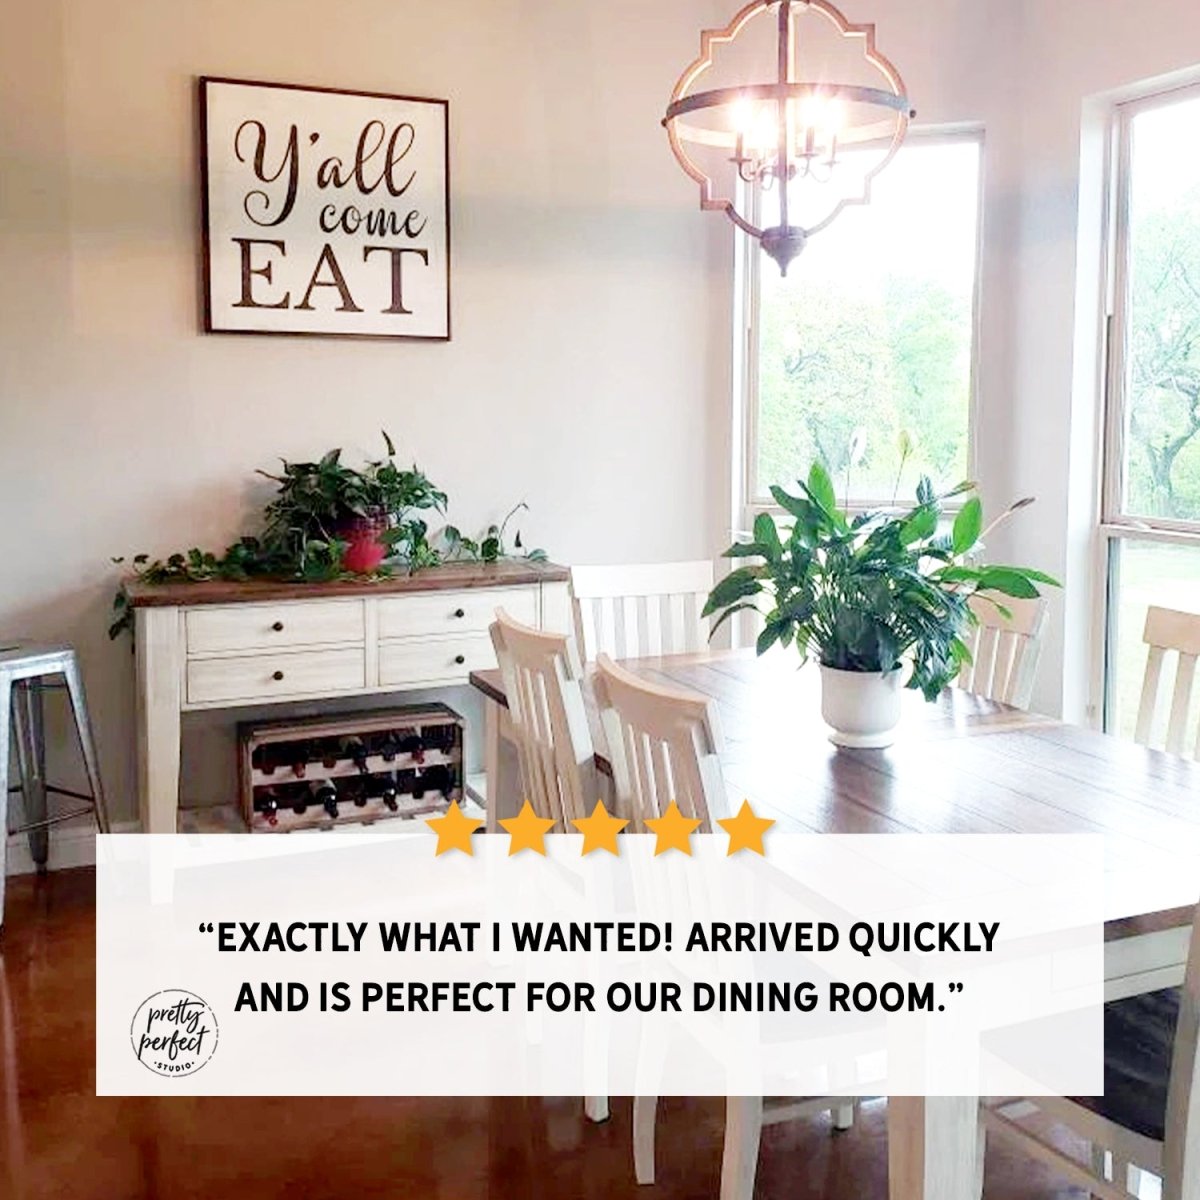 Customer product review for yall come eat sign by Pretty Perfect Studio